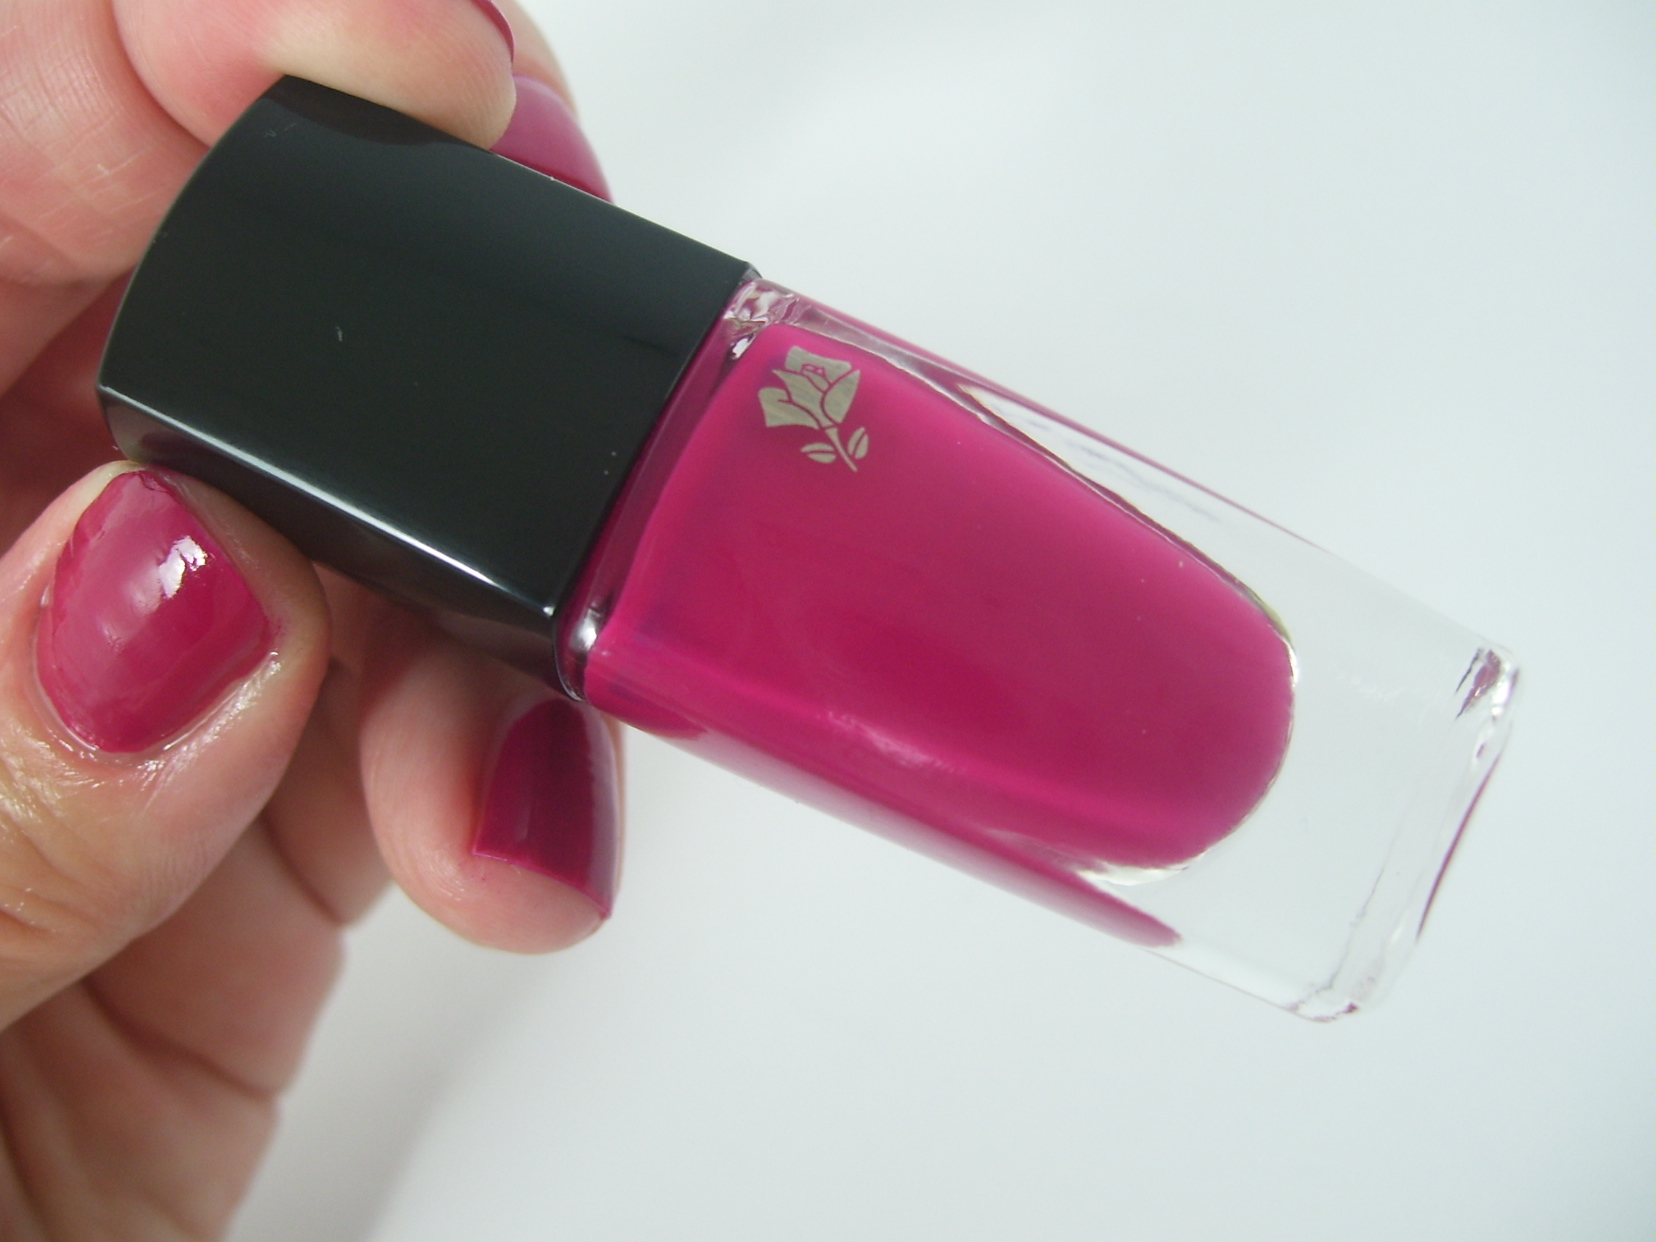 Swatch & Review:  Lancome Vernis in Love Nail Lacquer 375B Rose Boudoir